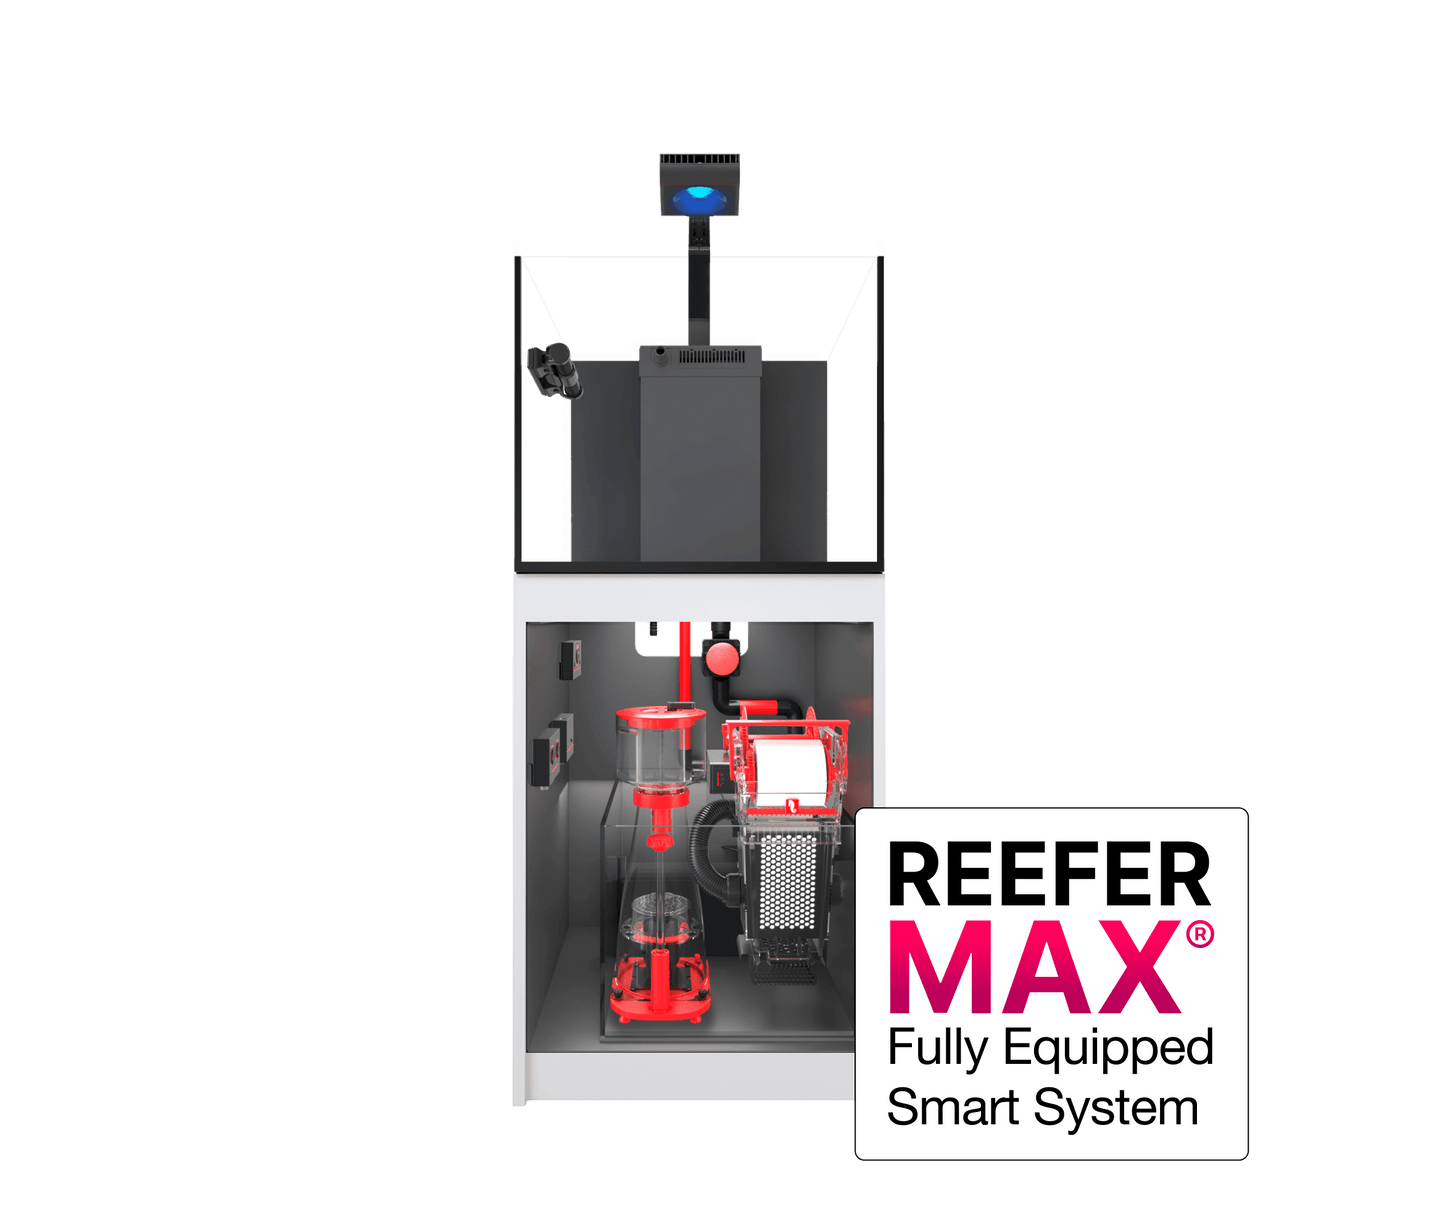 Red Sea - REEFER XL 170L G2+ Complete/Deluxe/MAX Reef System Options (45 Gallons) (Black/Pearl White)